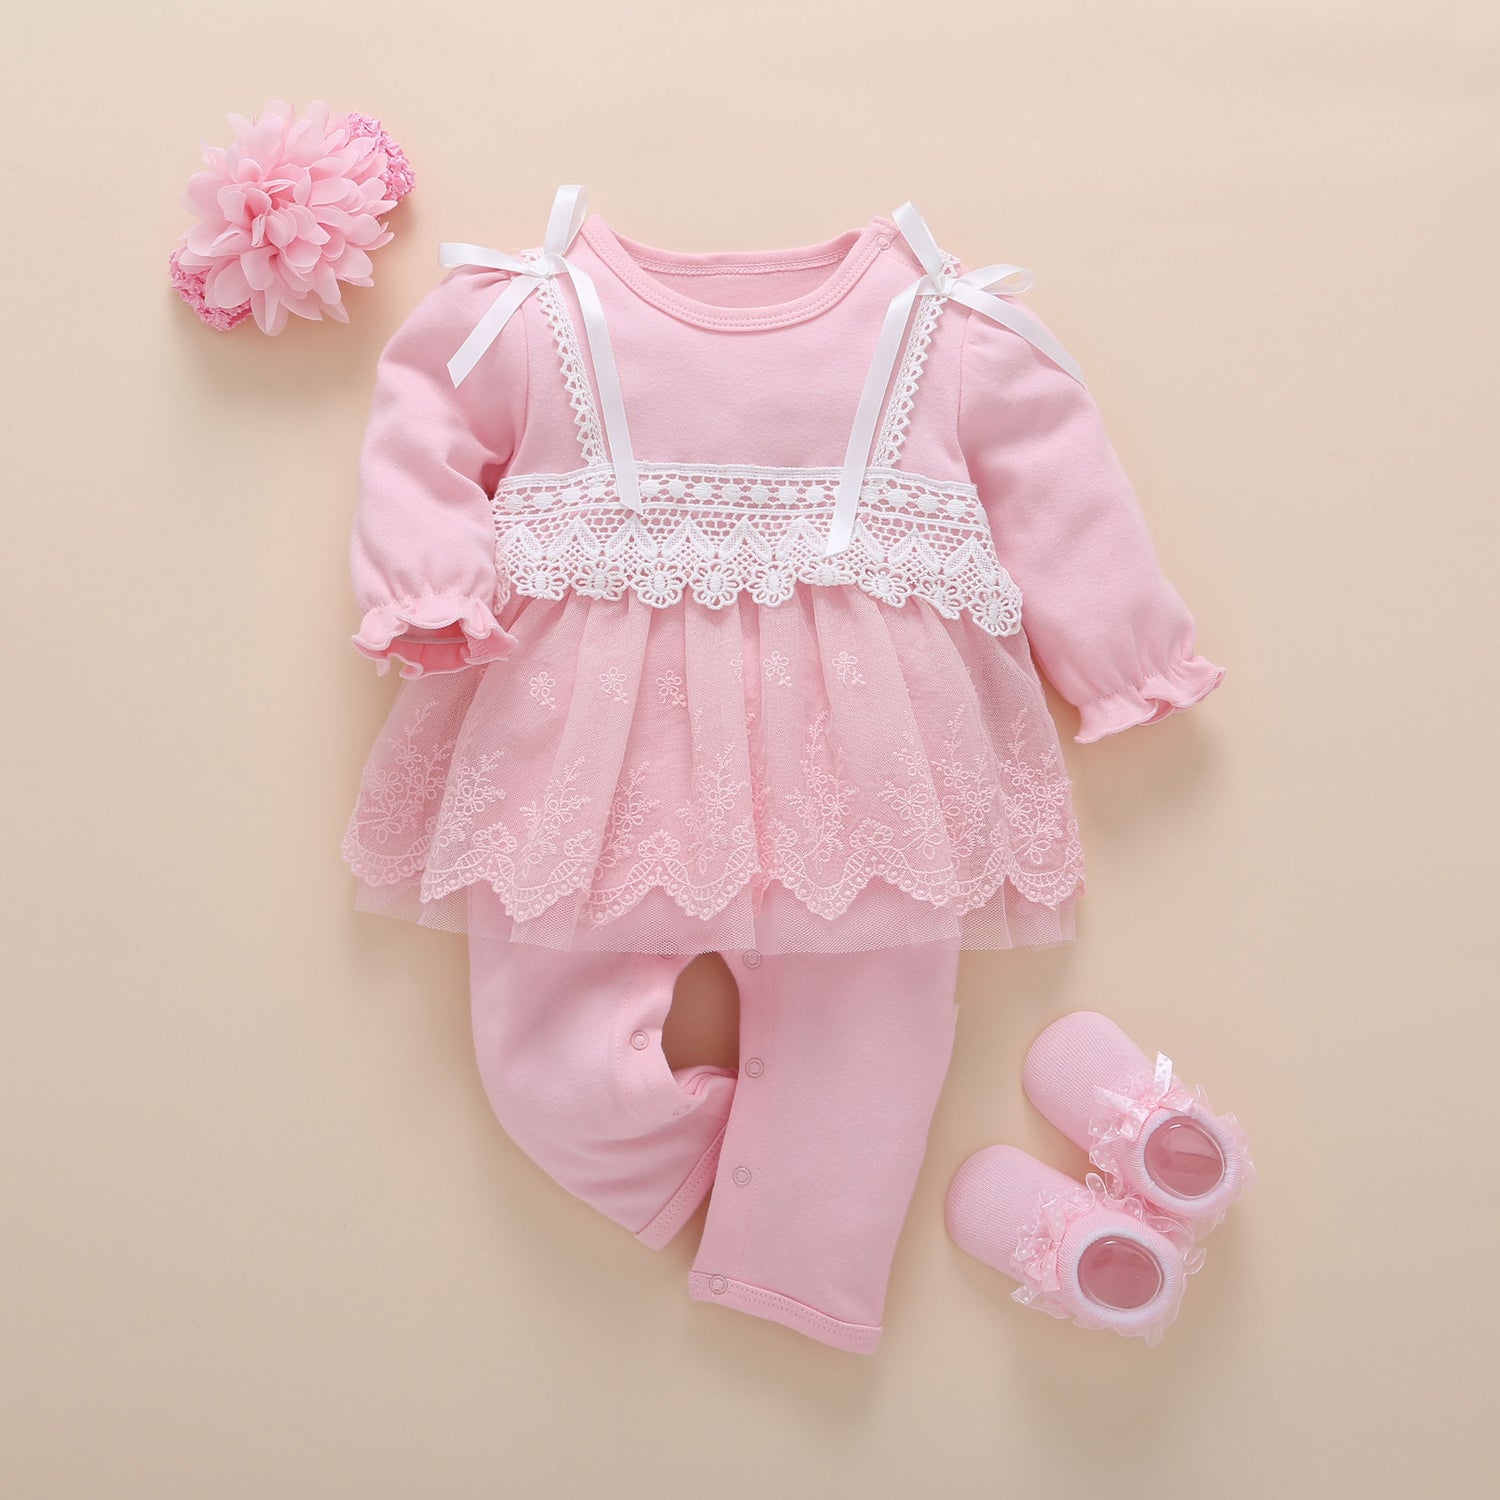 Half-year-old baby girl's jumpsuit  Infant Suit Thecurvestory